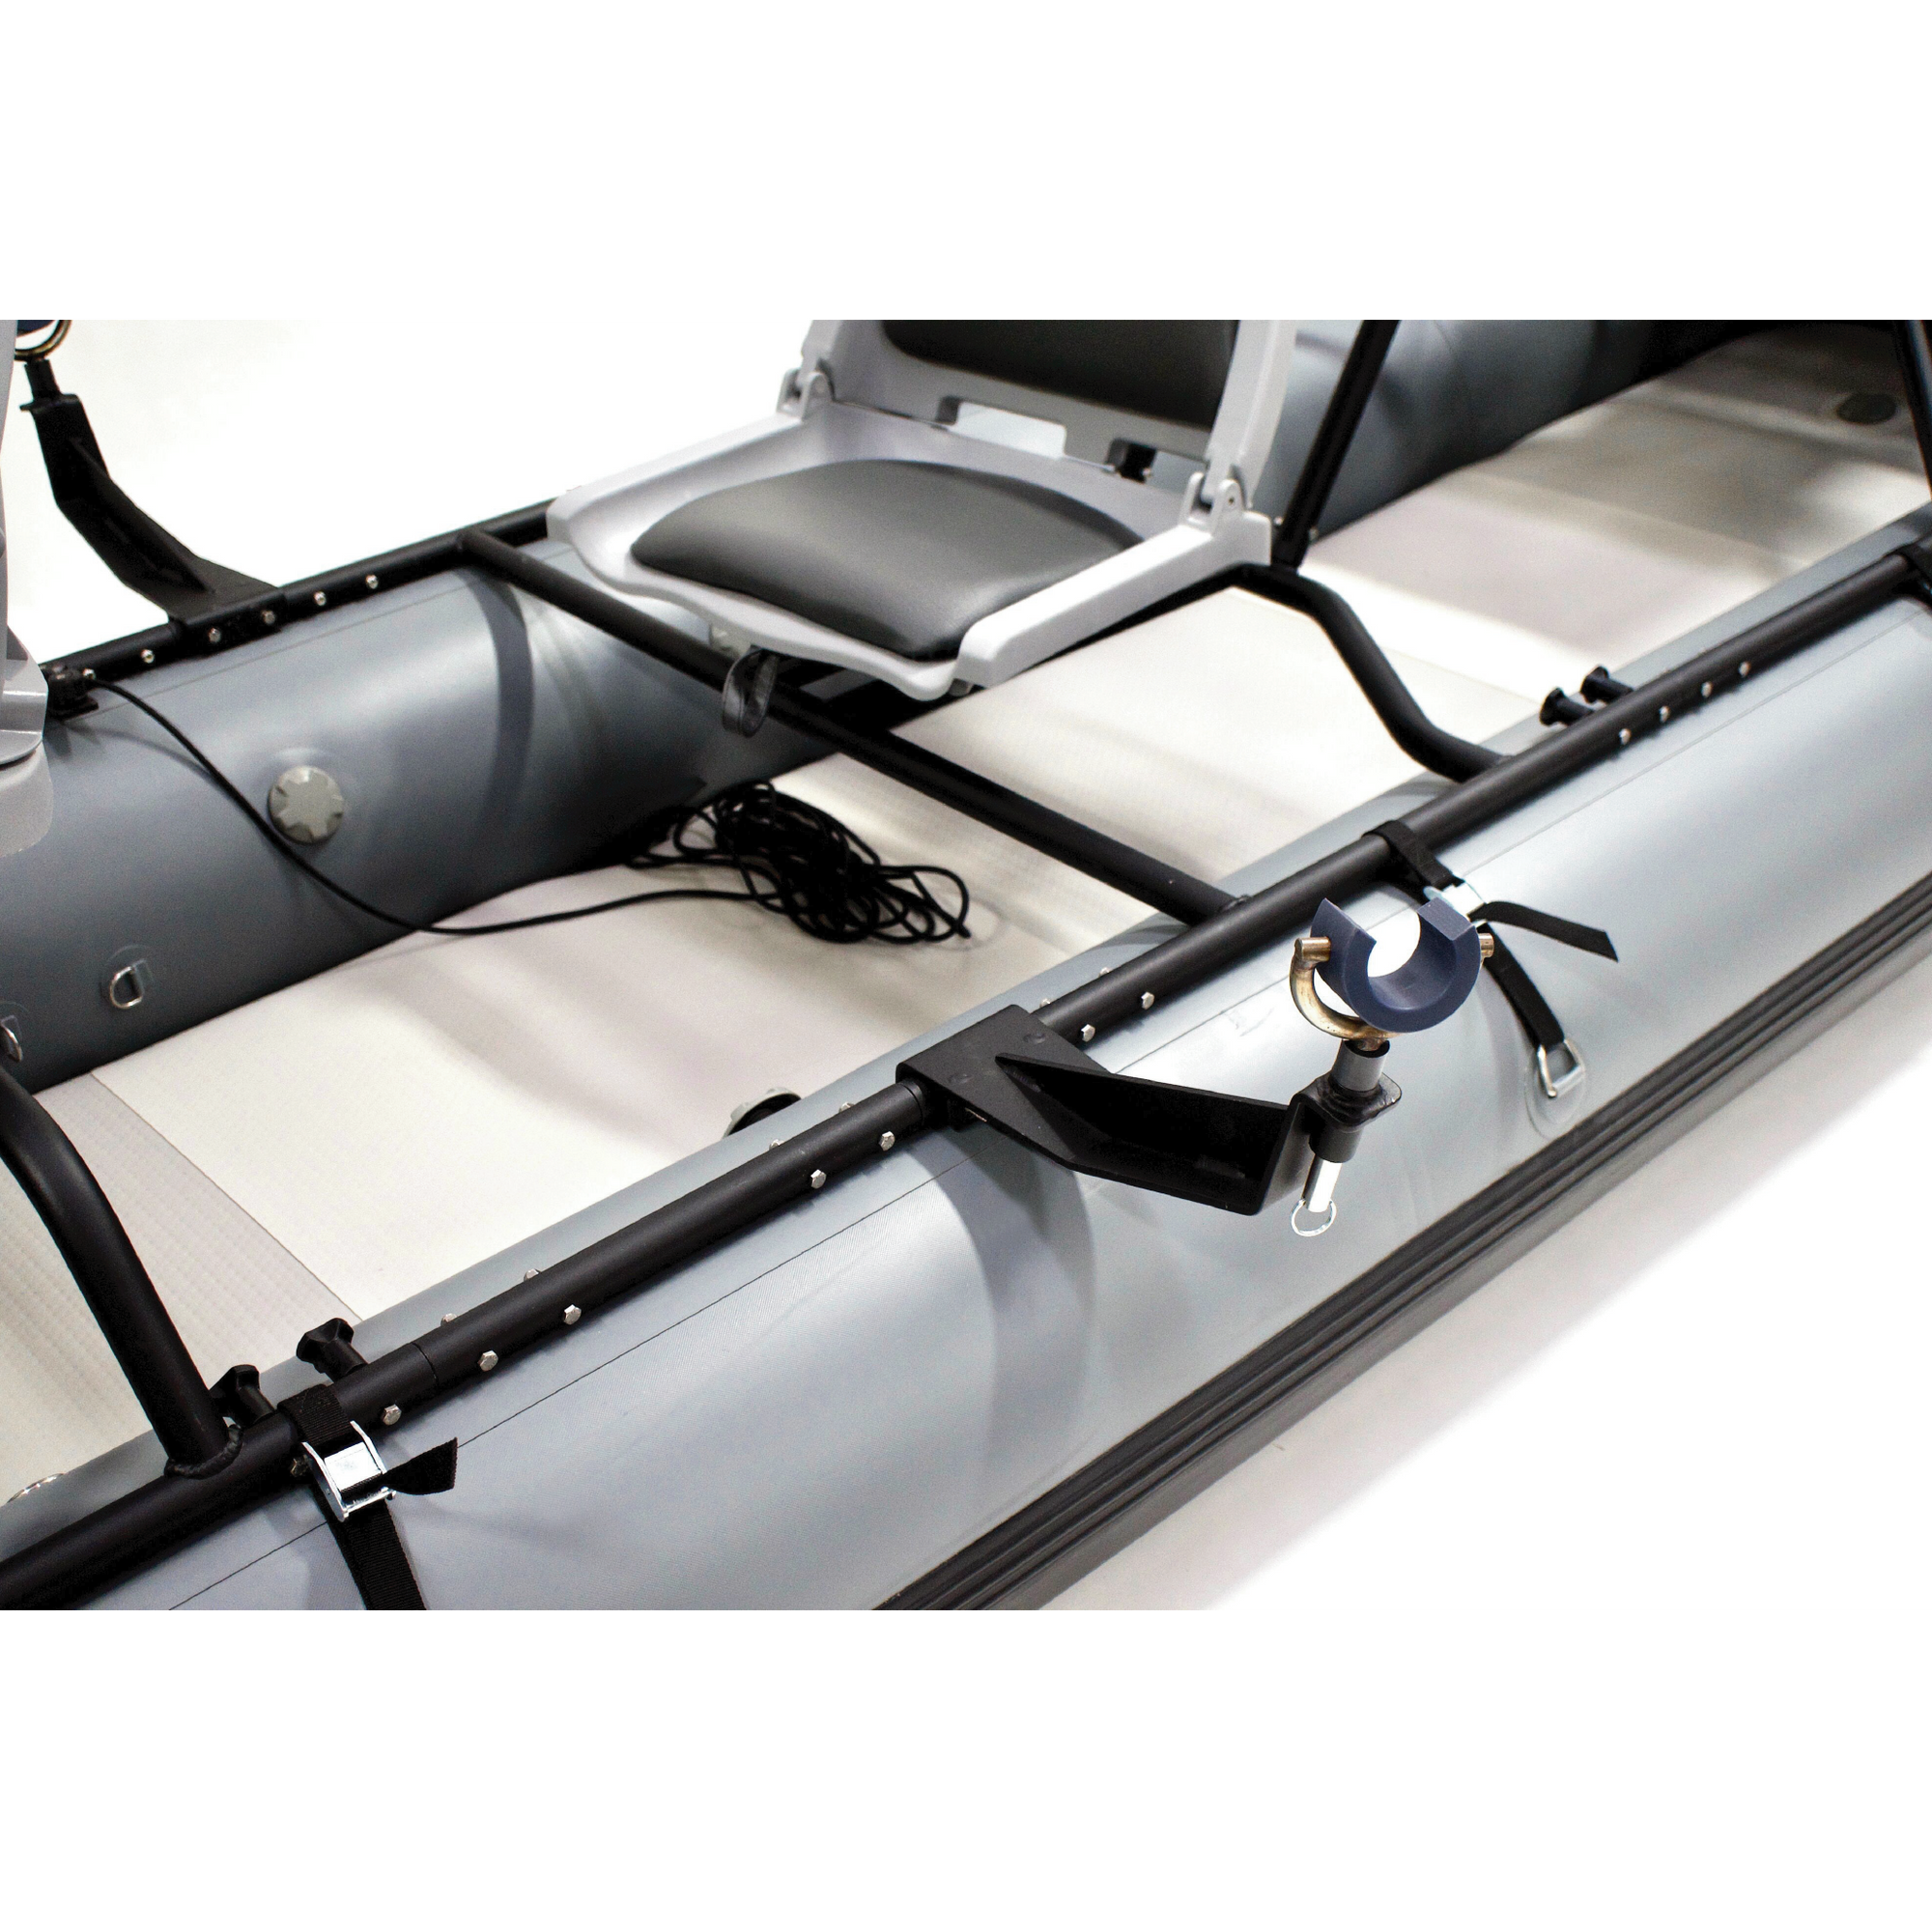 Flycraft’s Inflatable Fishing Boat: Guide Fish Package (3-Man)